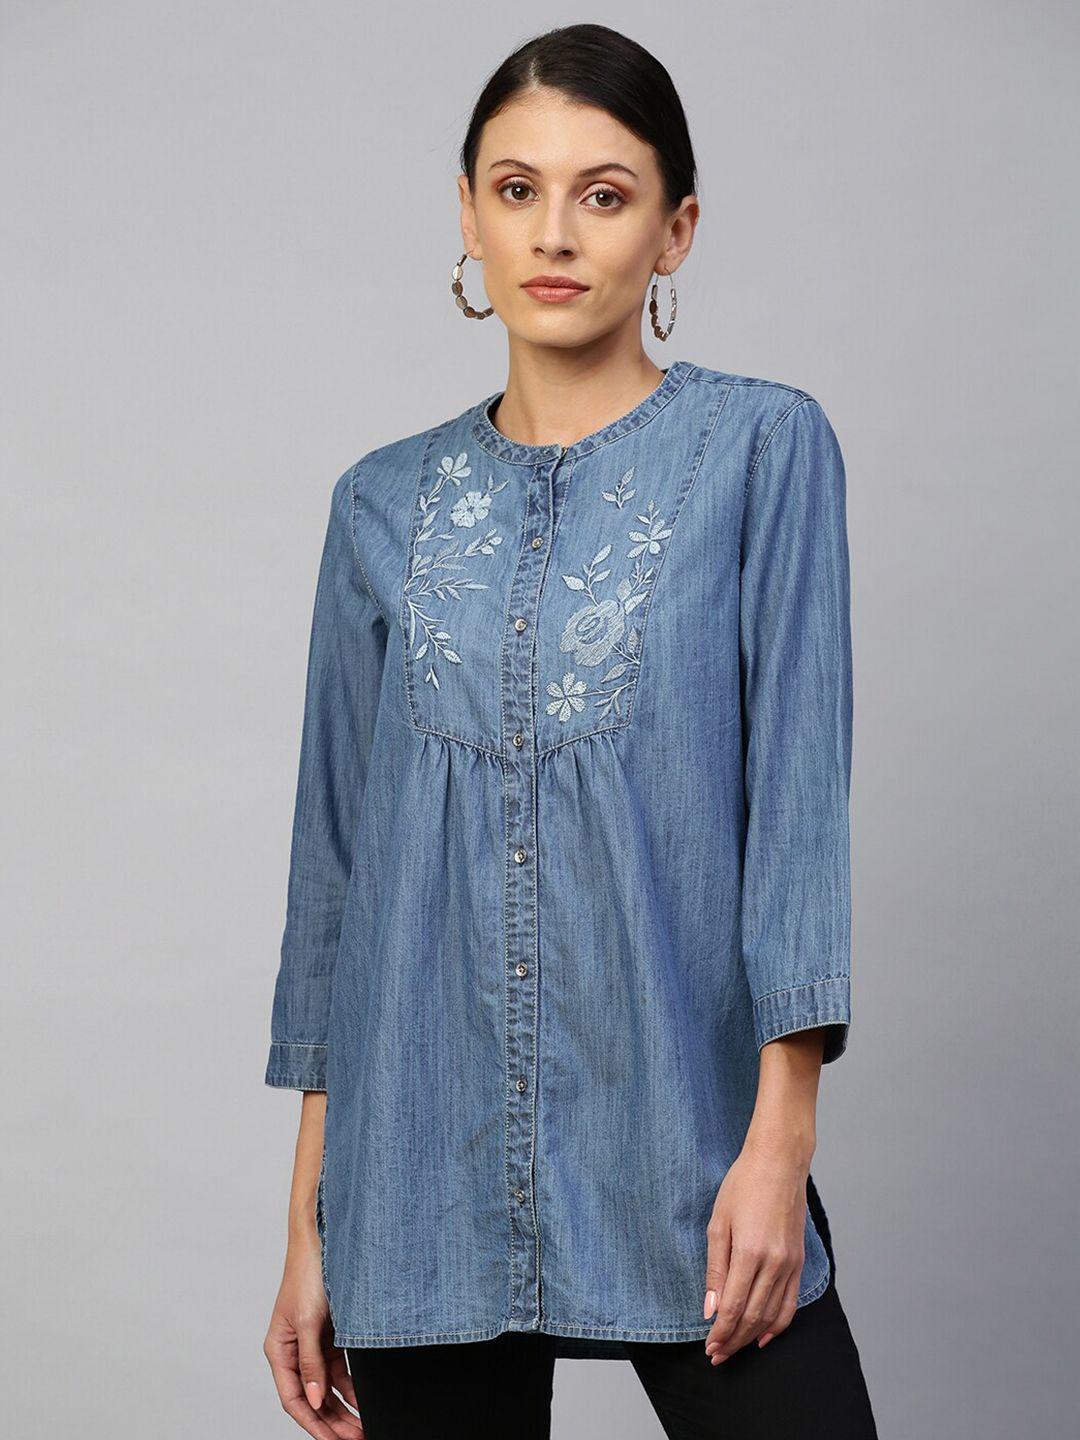 chemistry blue floral embroidered denim shirt style top